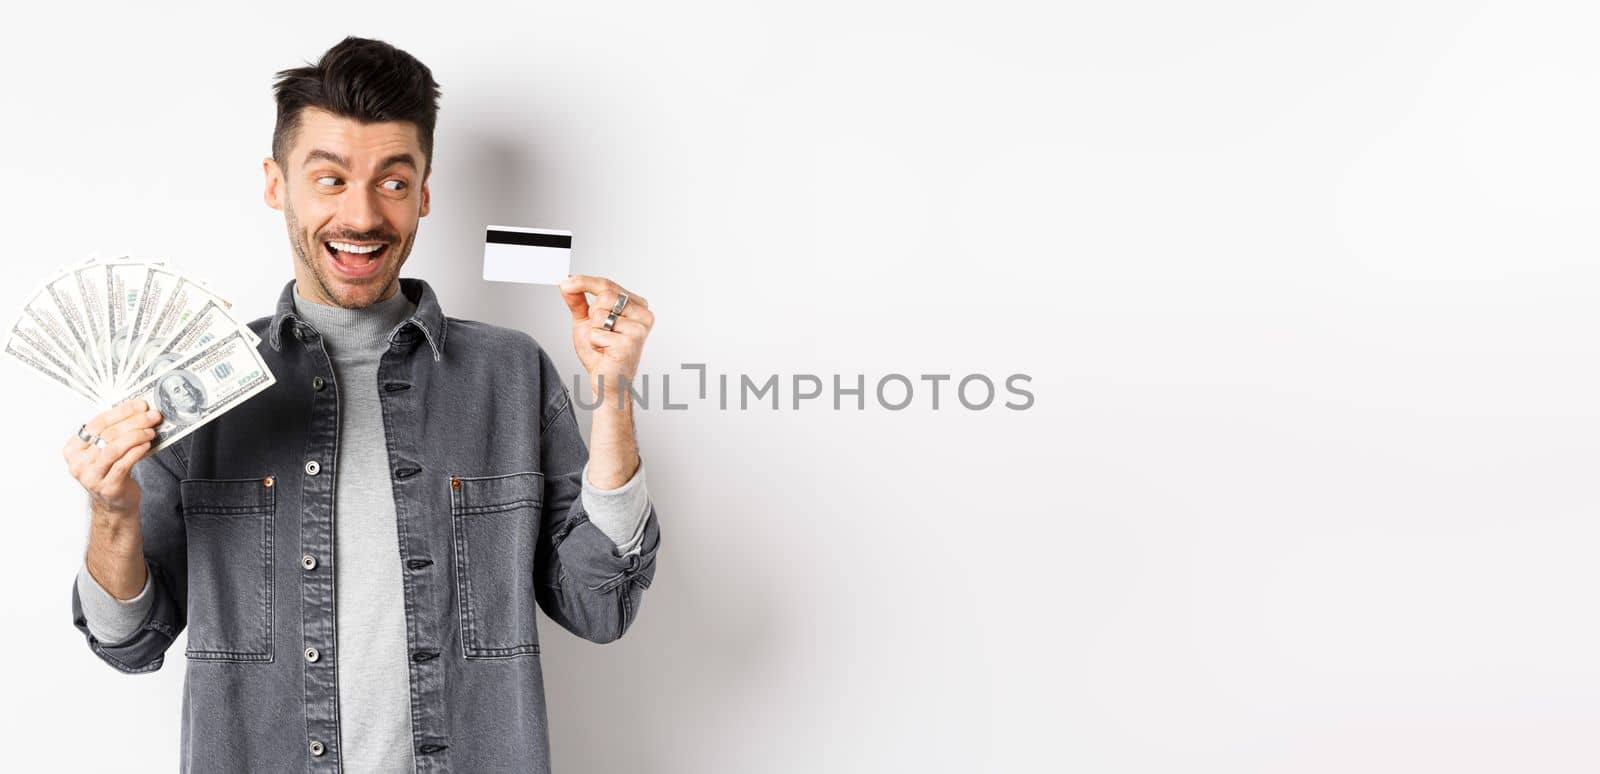 Excited guy holding plastic credit card and dollar bills, standing amused on white background.